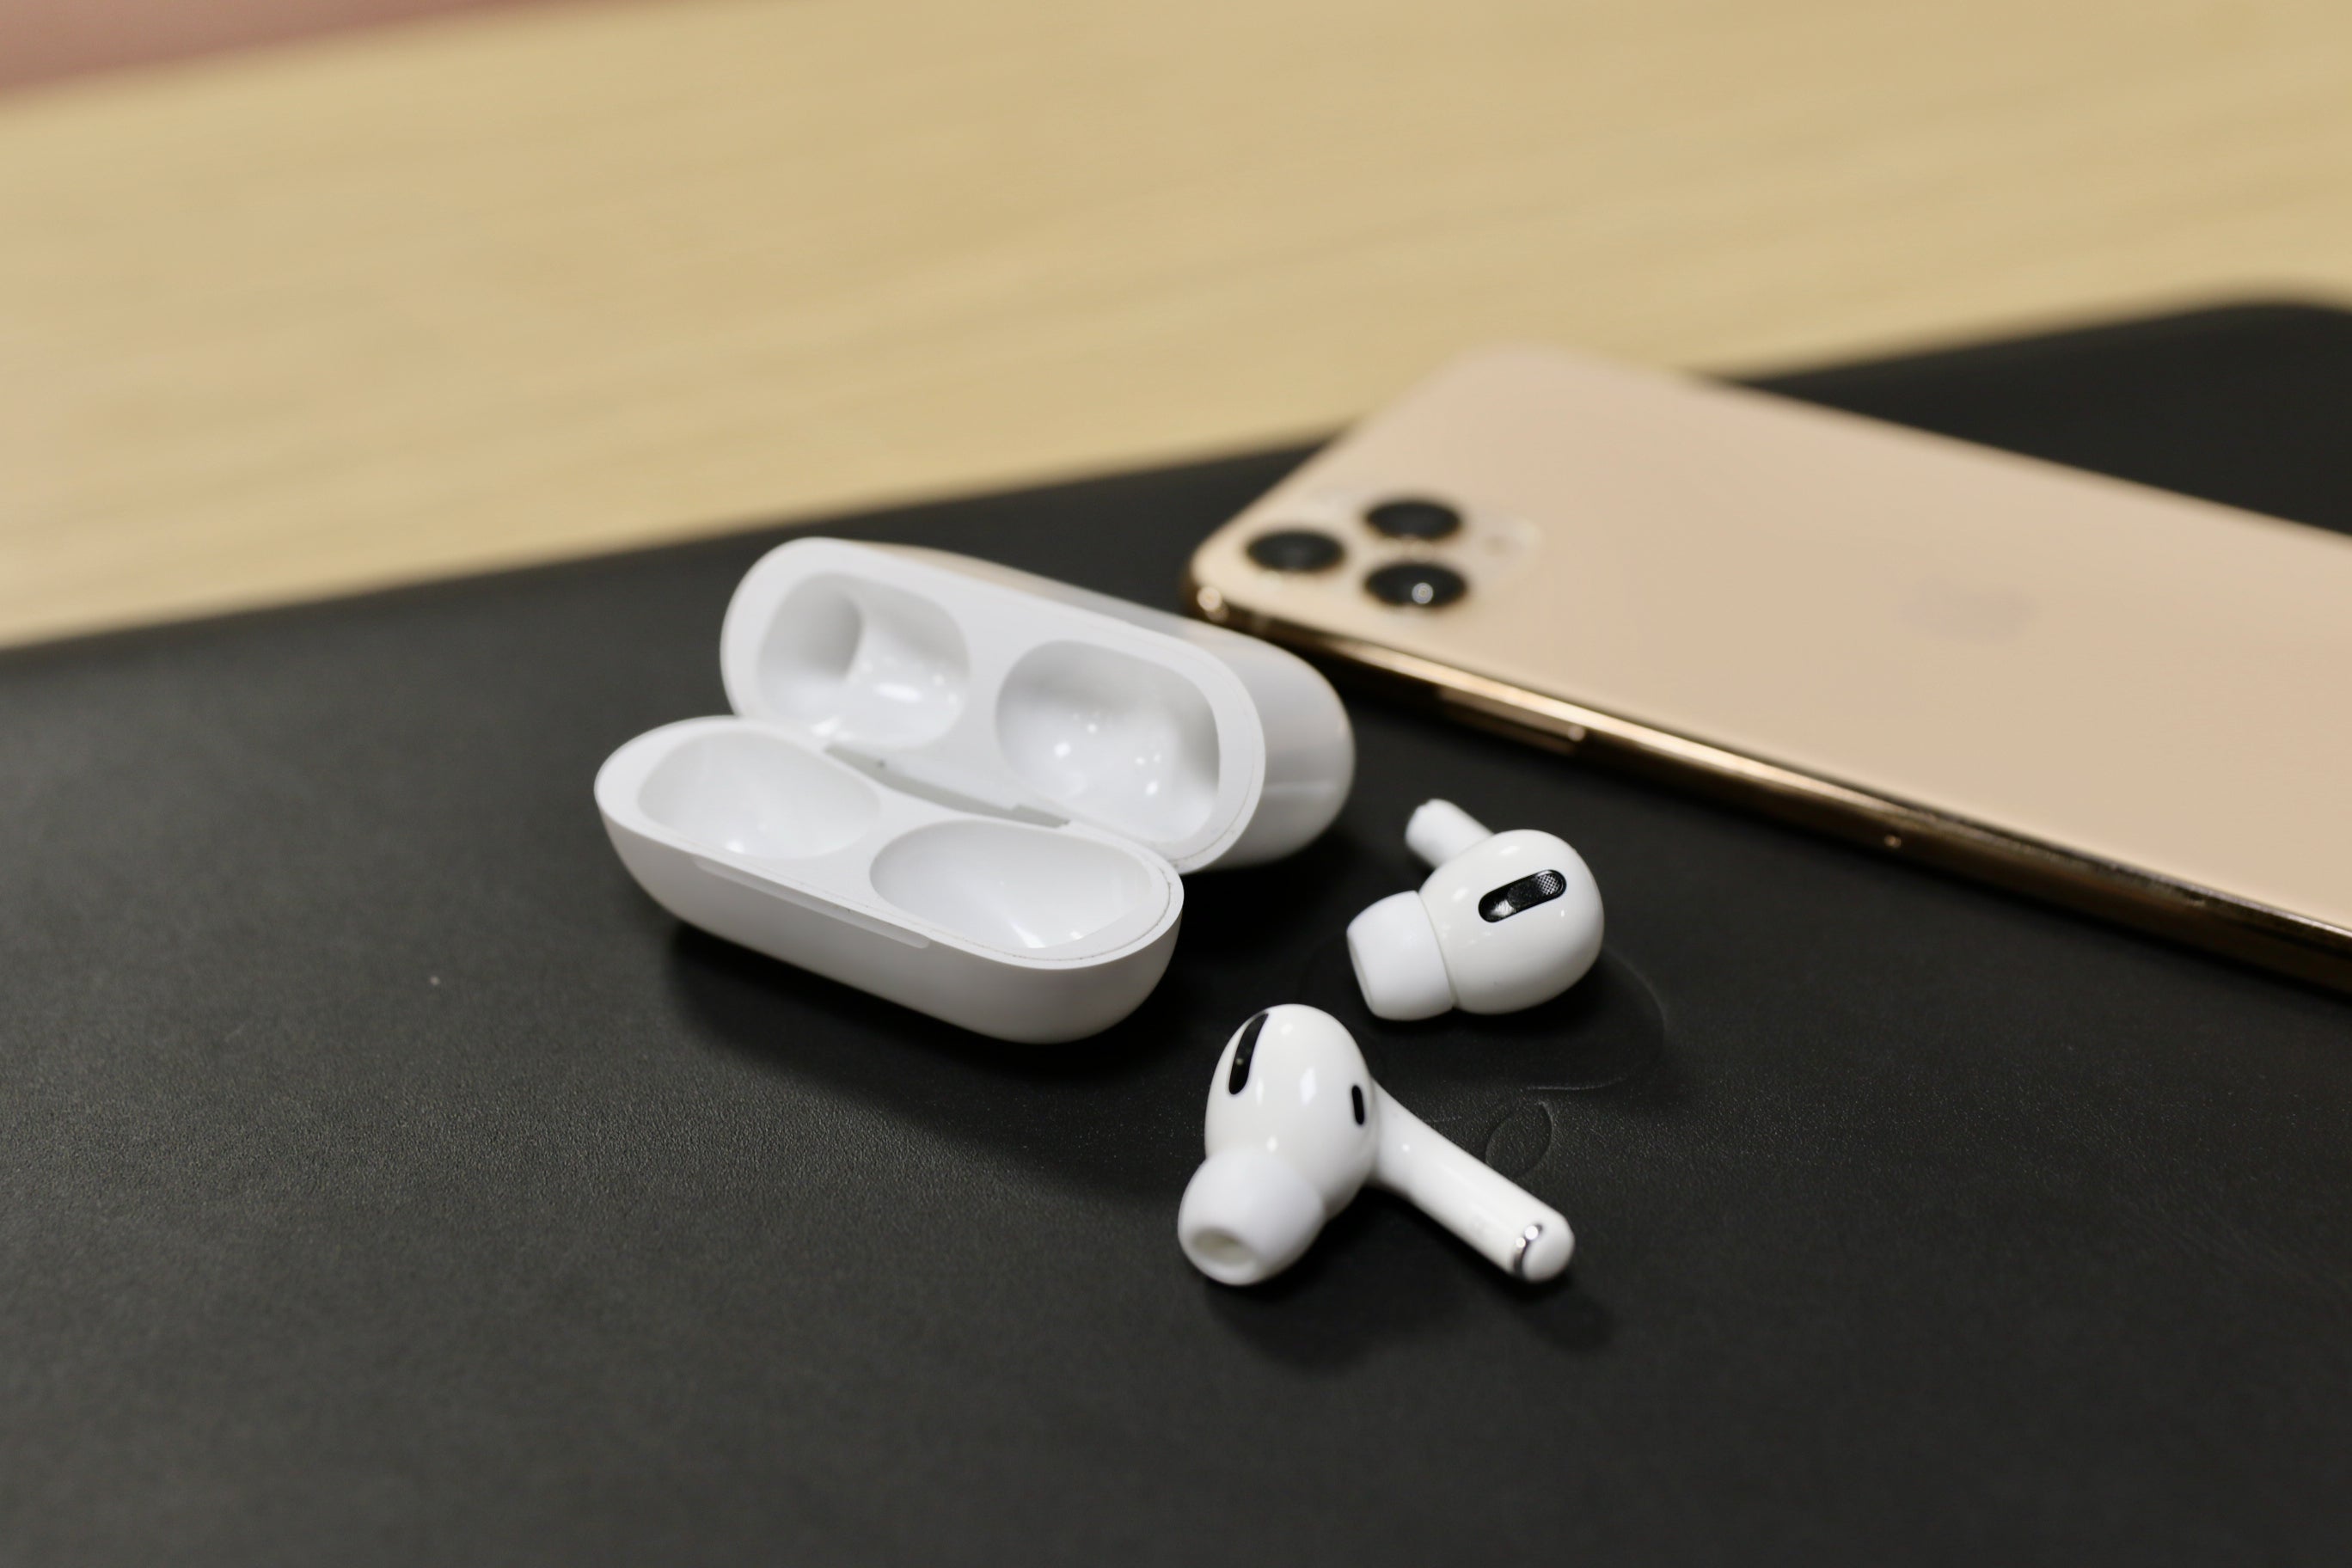 How to Track Airpods on Android?